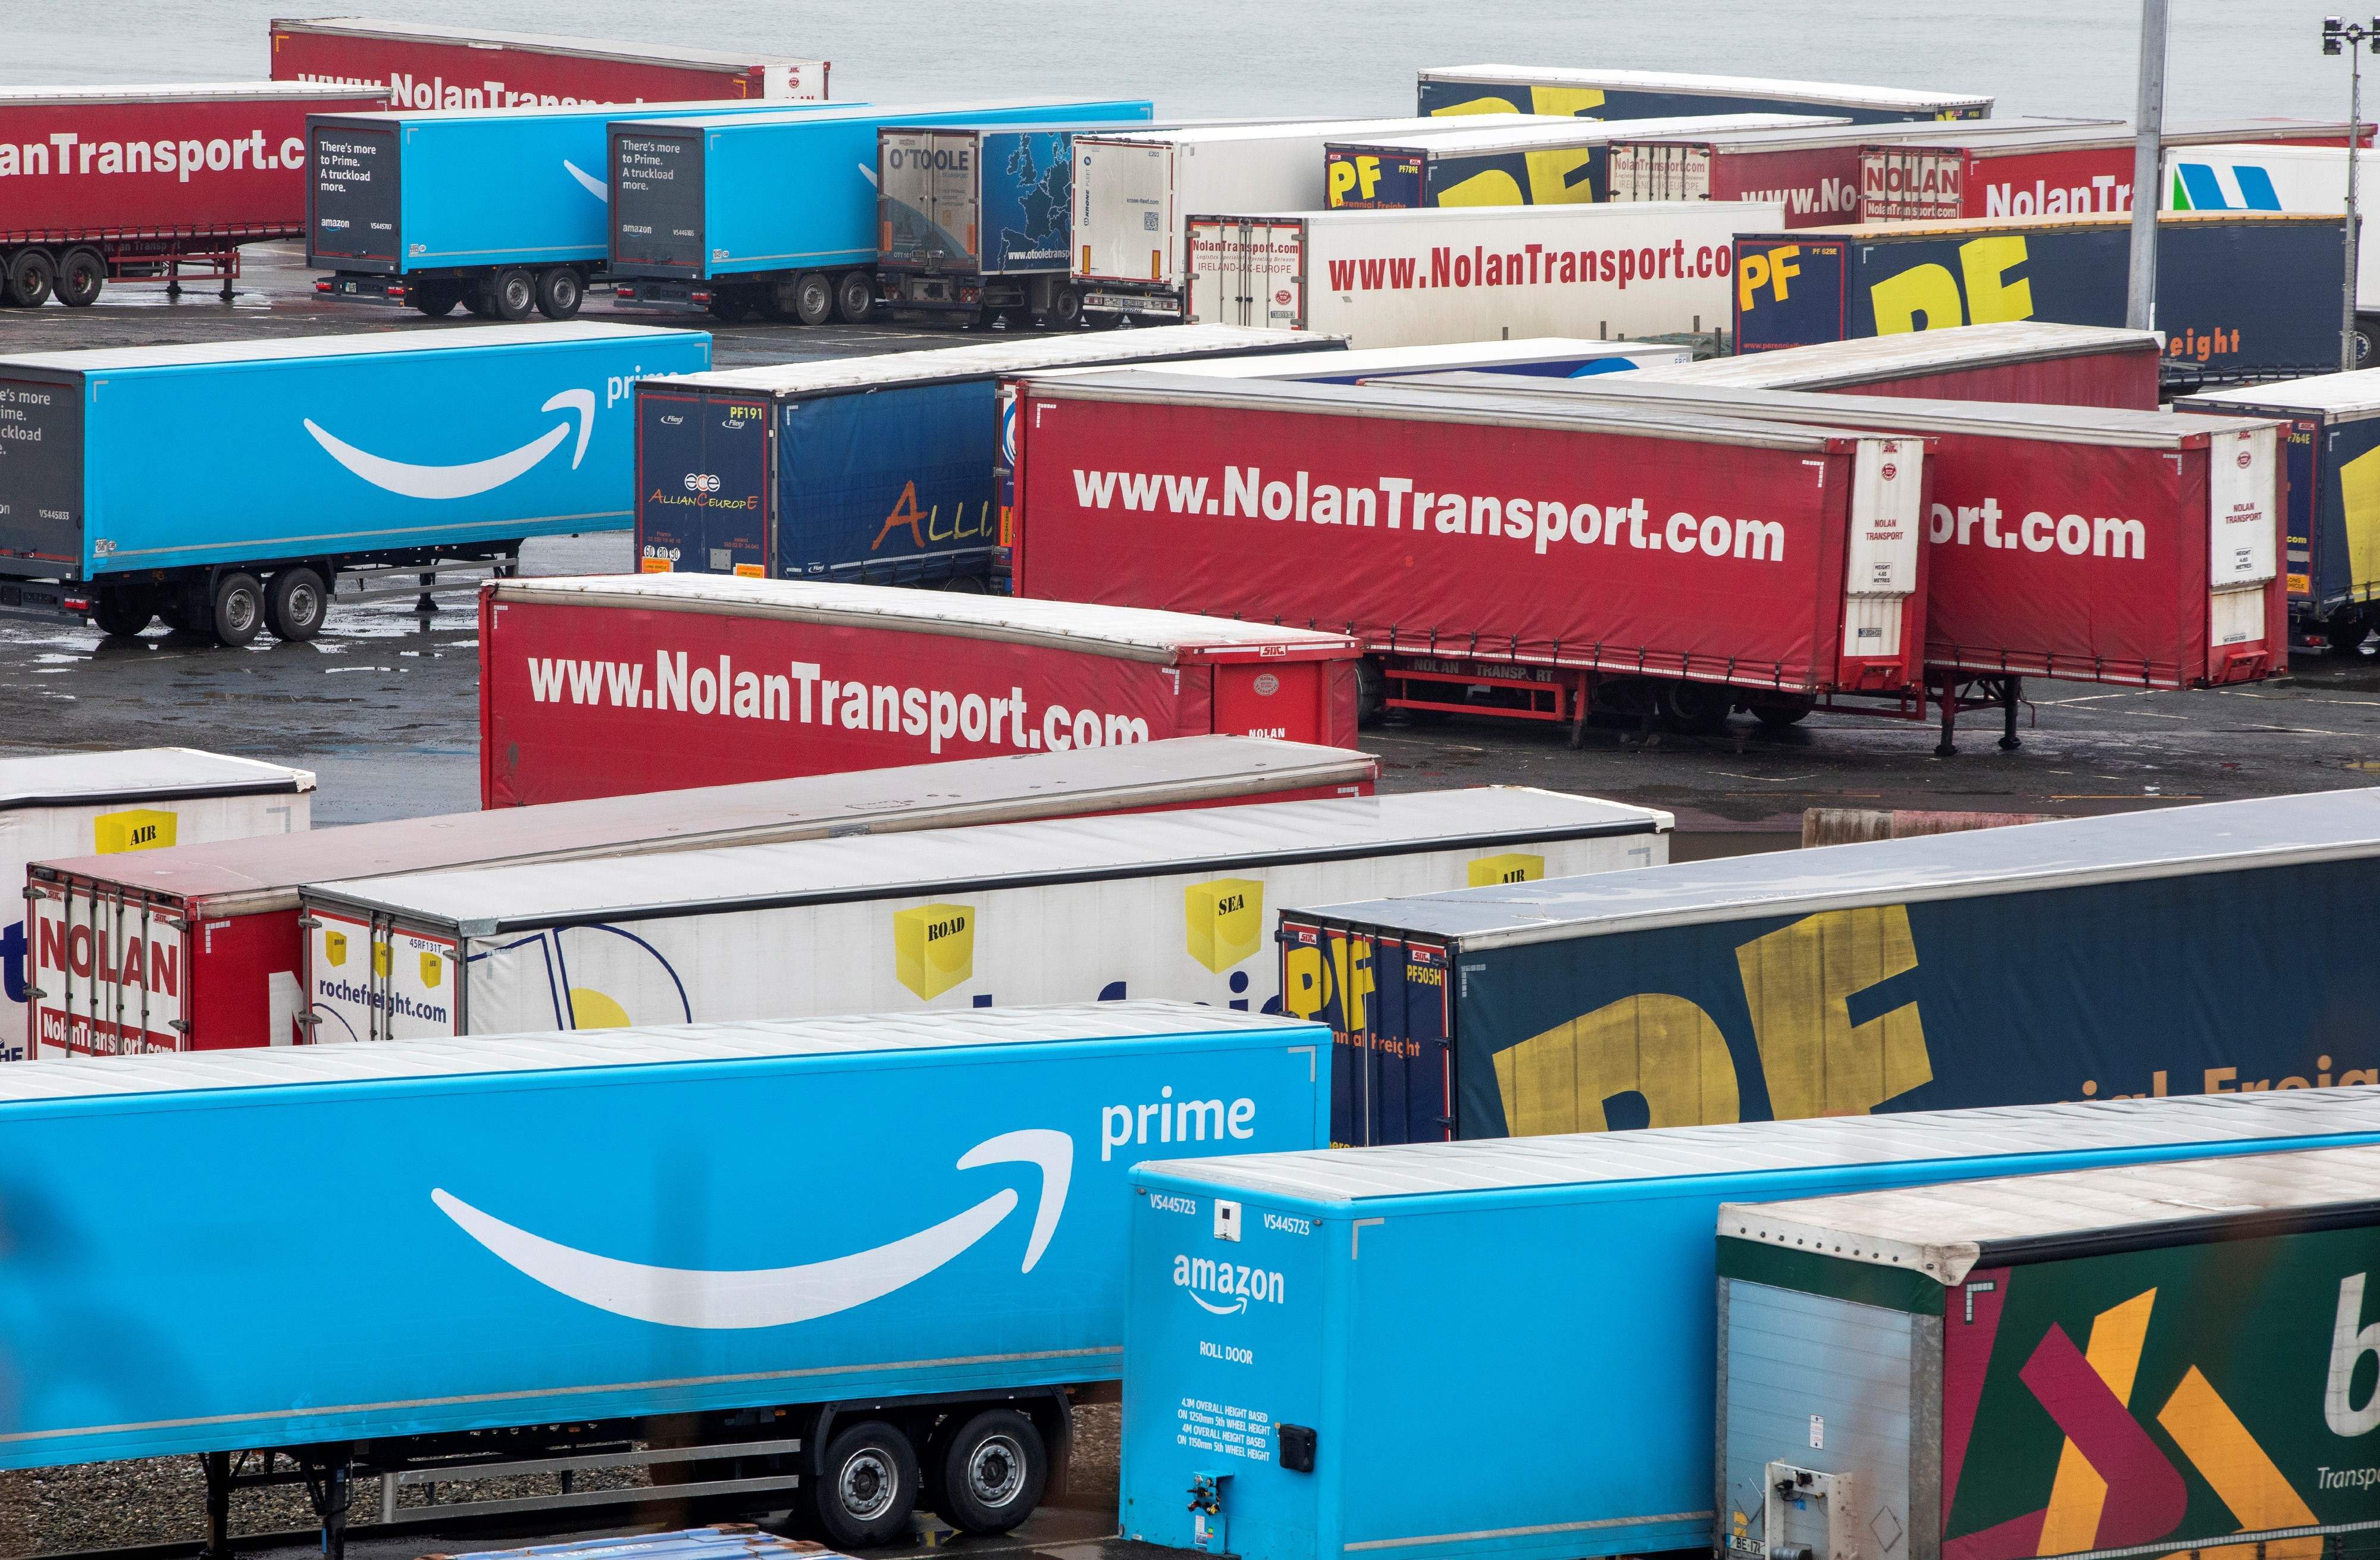 Amazon-branded freight and trucks are pictured at Rosslare Harbour, Ireland, on 27 January, 2021.